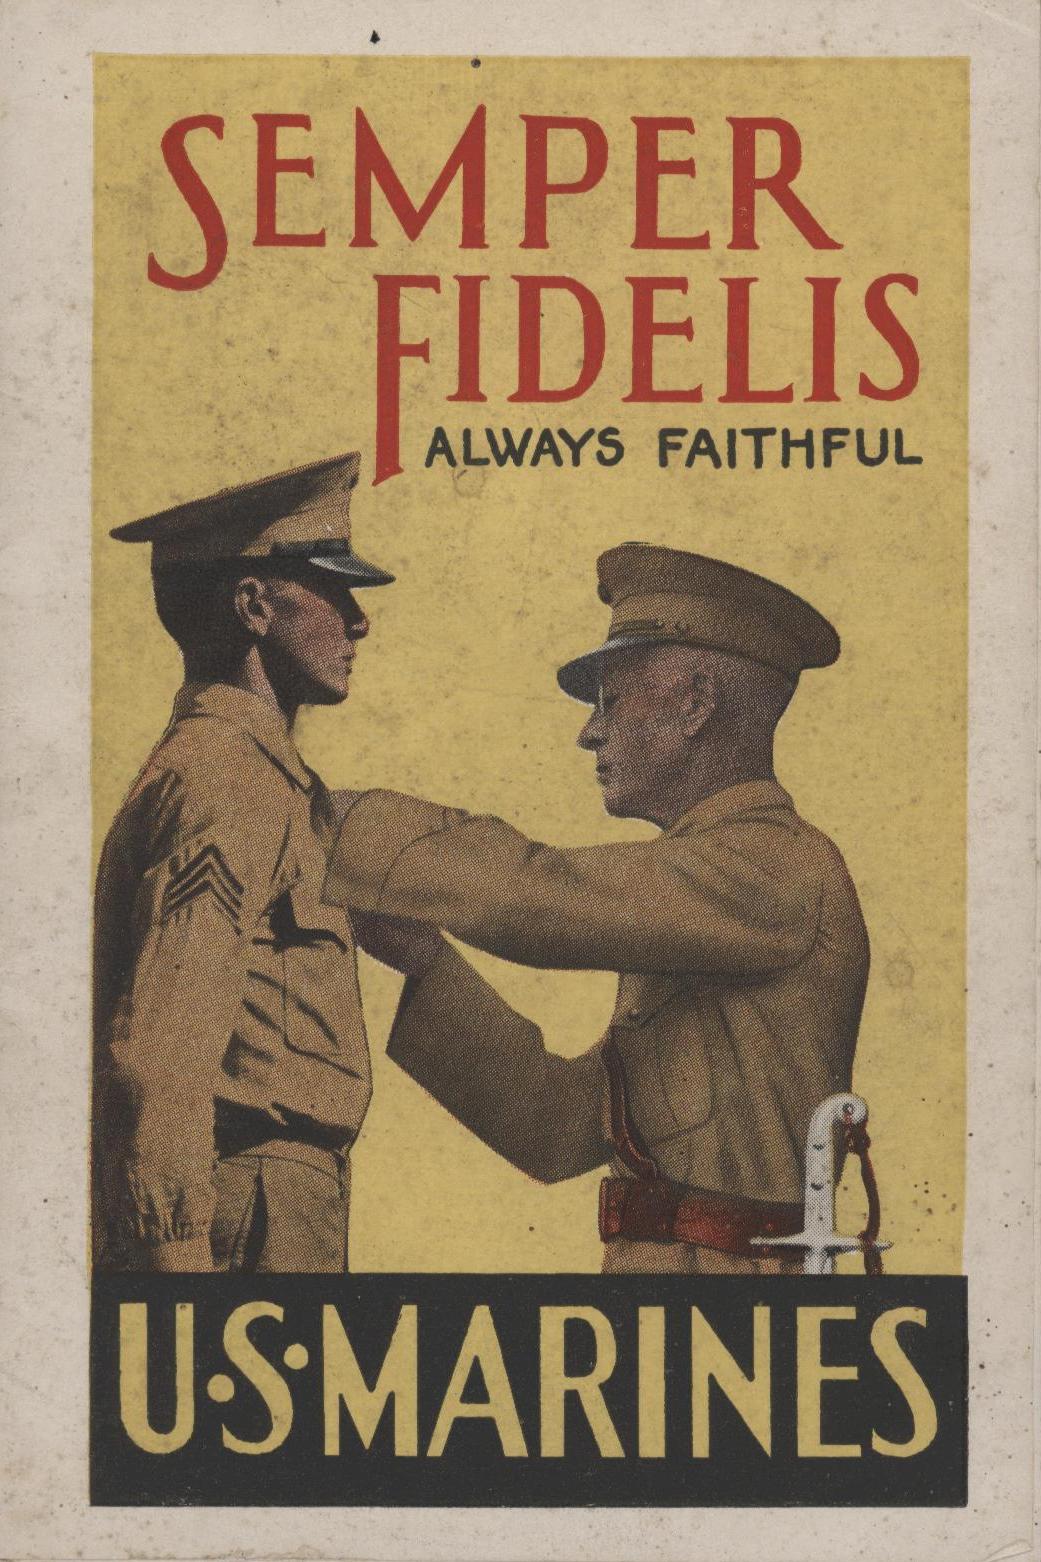 an old military card with two soldiers shaking hands